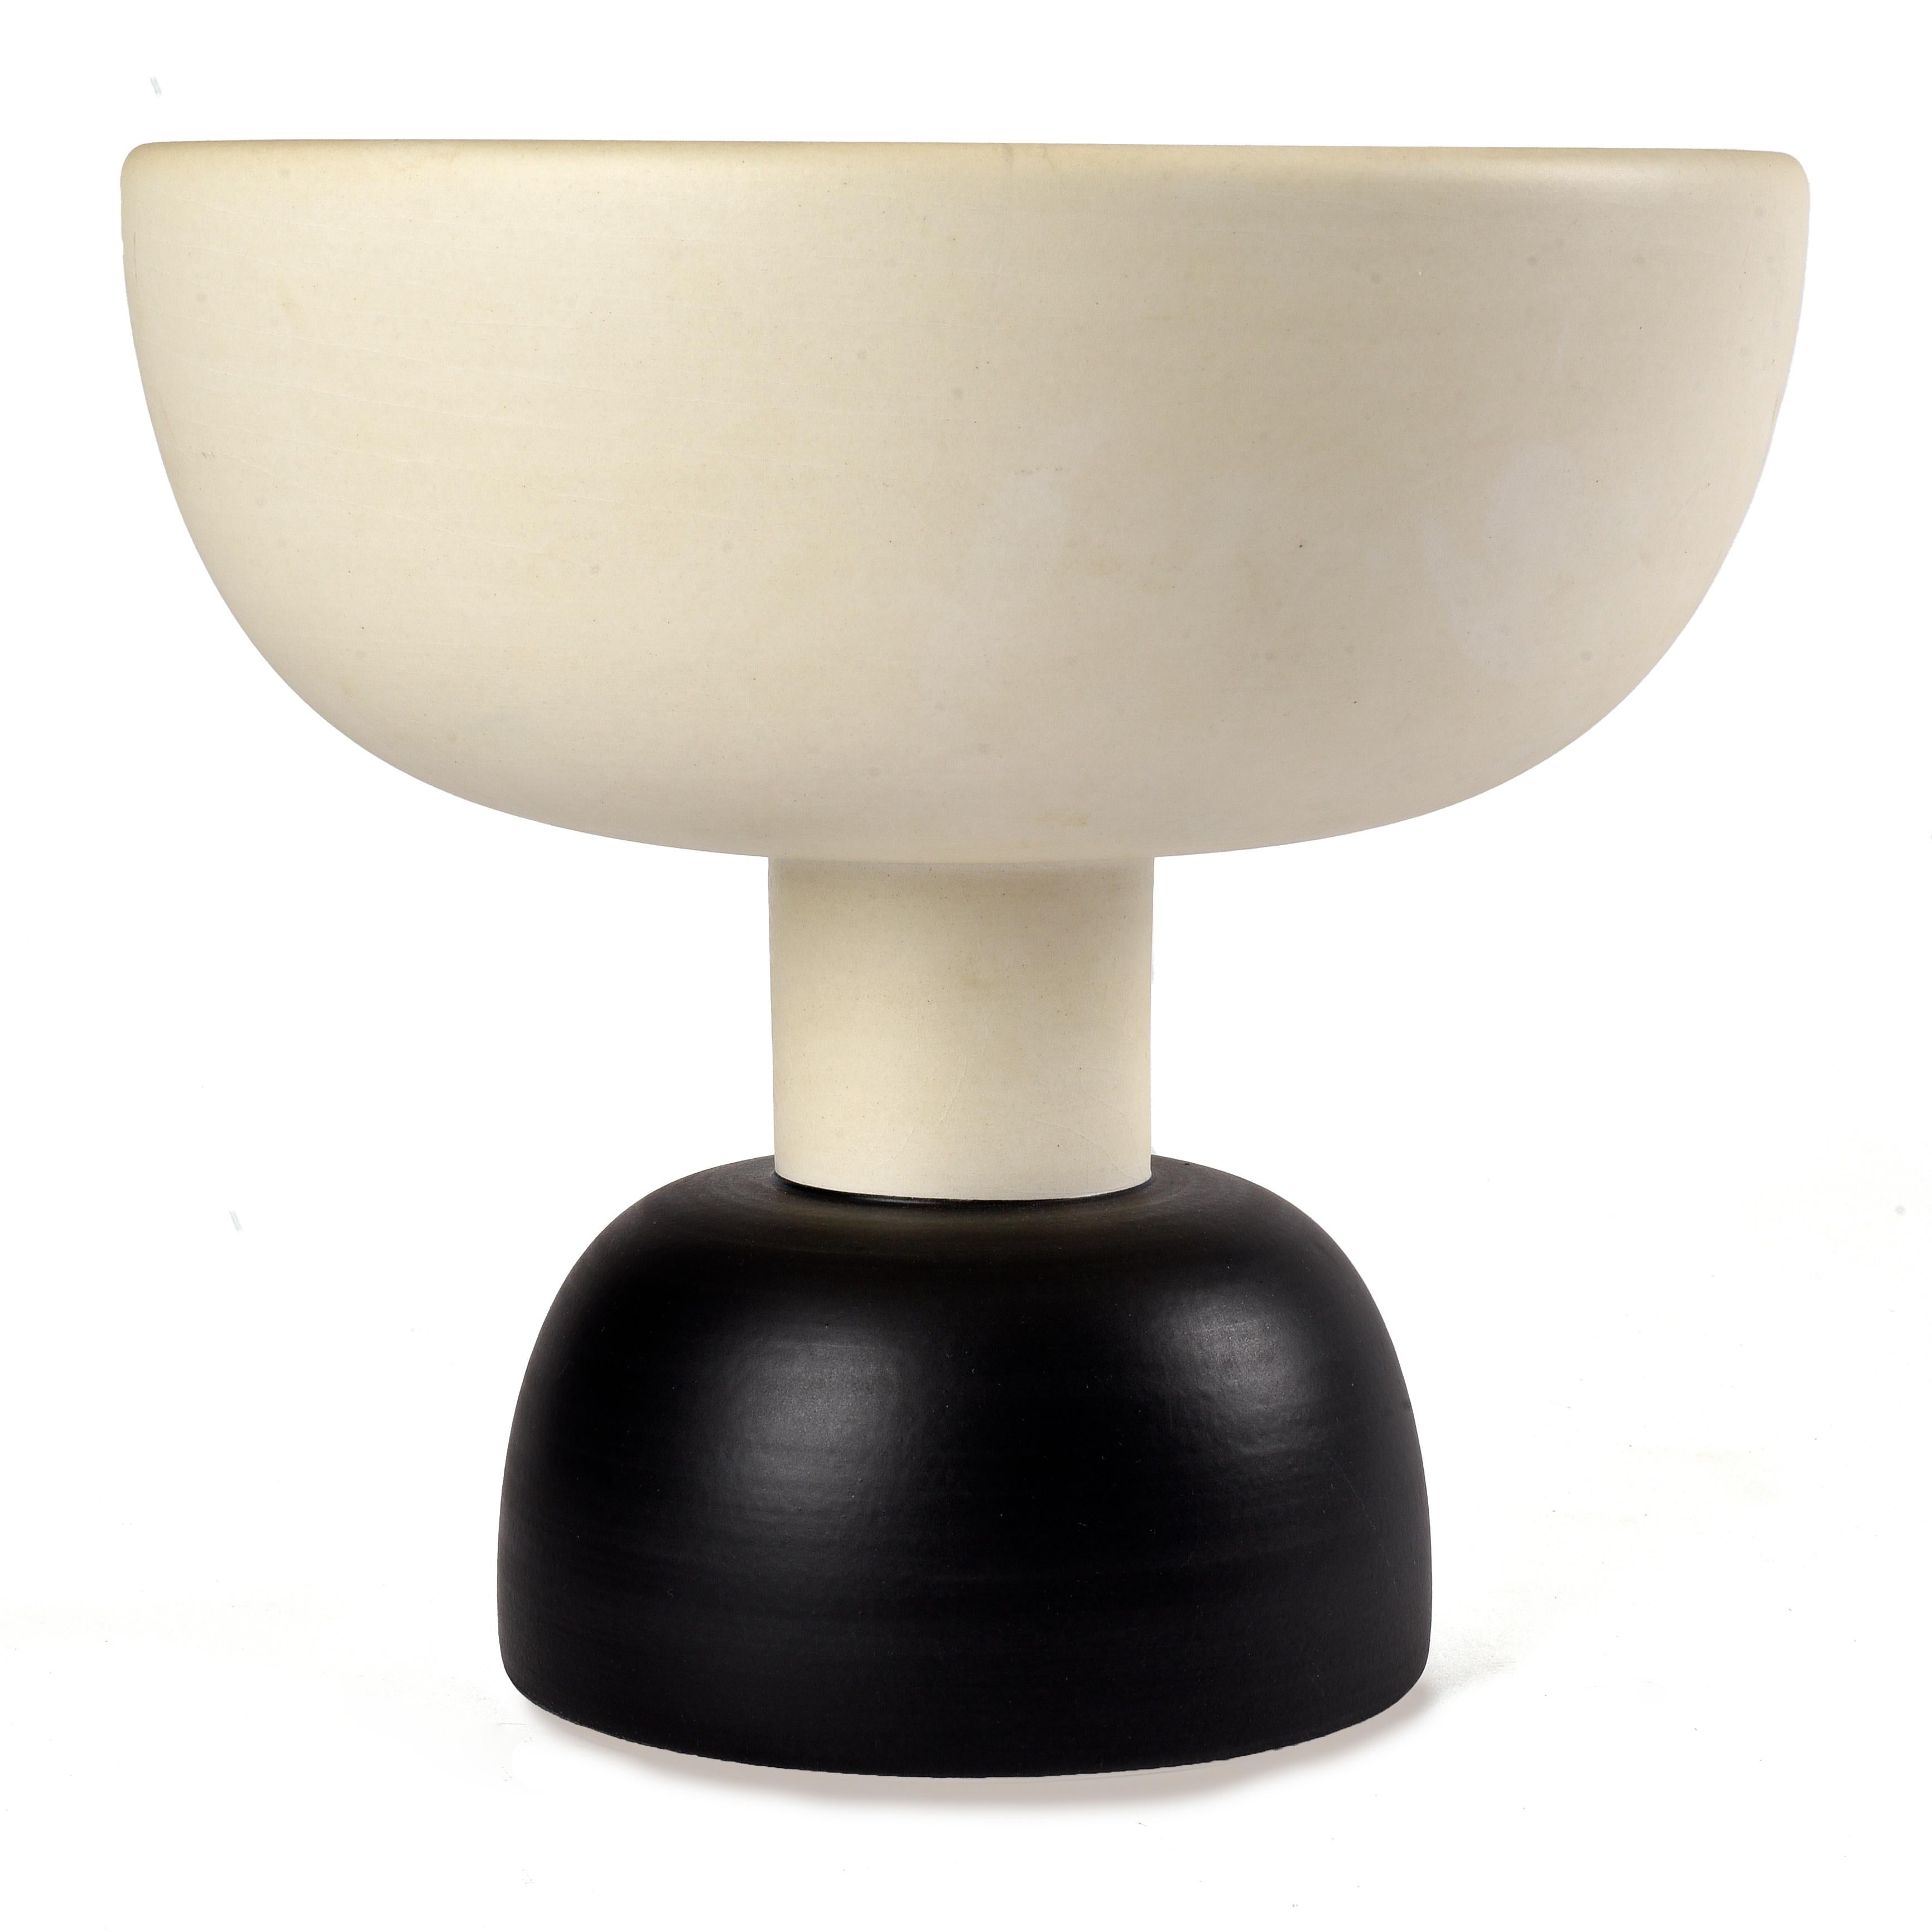 Ettore Sottsass (1917-2007). 
Alzata Grande 501, c. 1980
Bitossi Ceramiche Montelupo editor.
Circular ceramic cup.
Black and white painted circular decorations.
Signed under the base.
Measures: Height : 23 cm - diameter : 25 cm. 

Come with